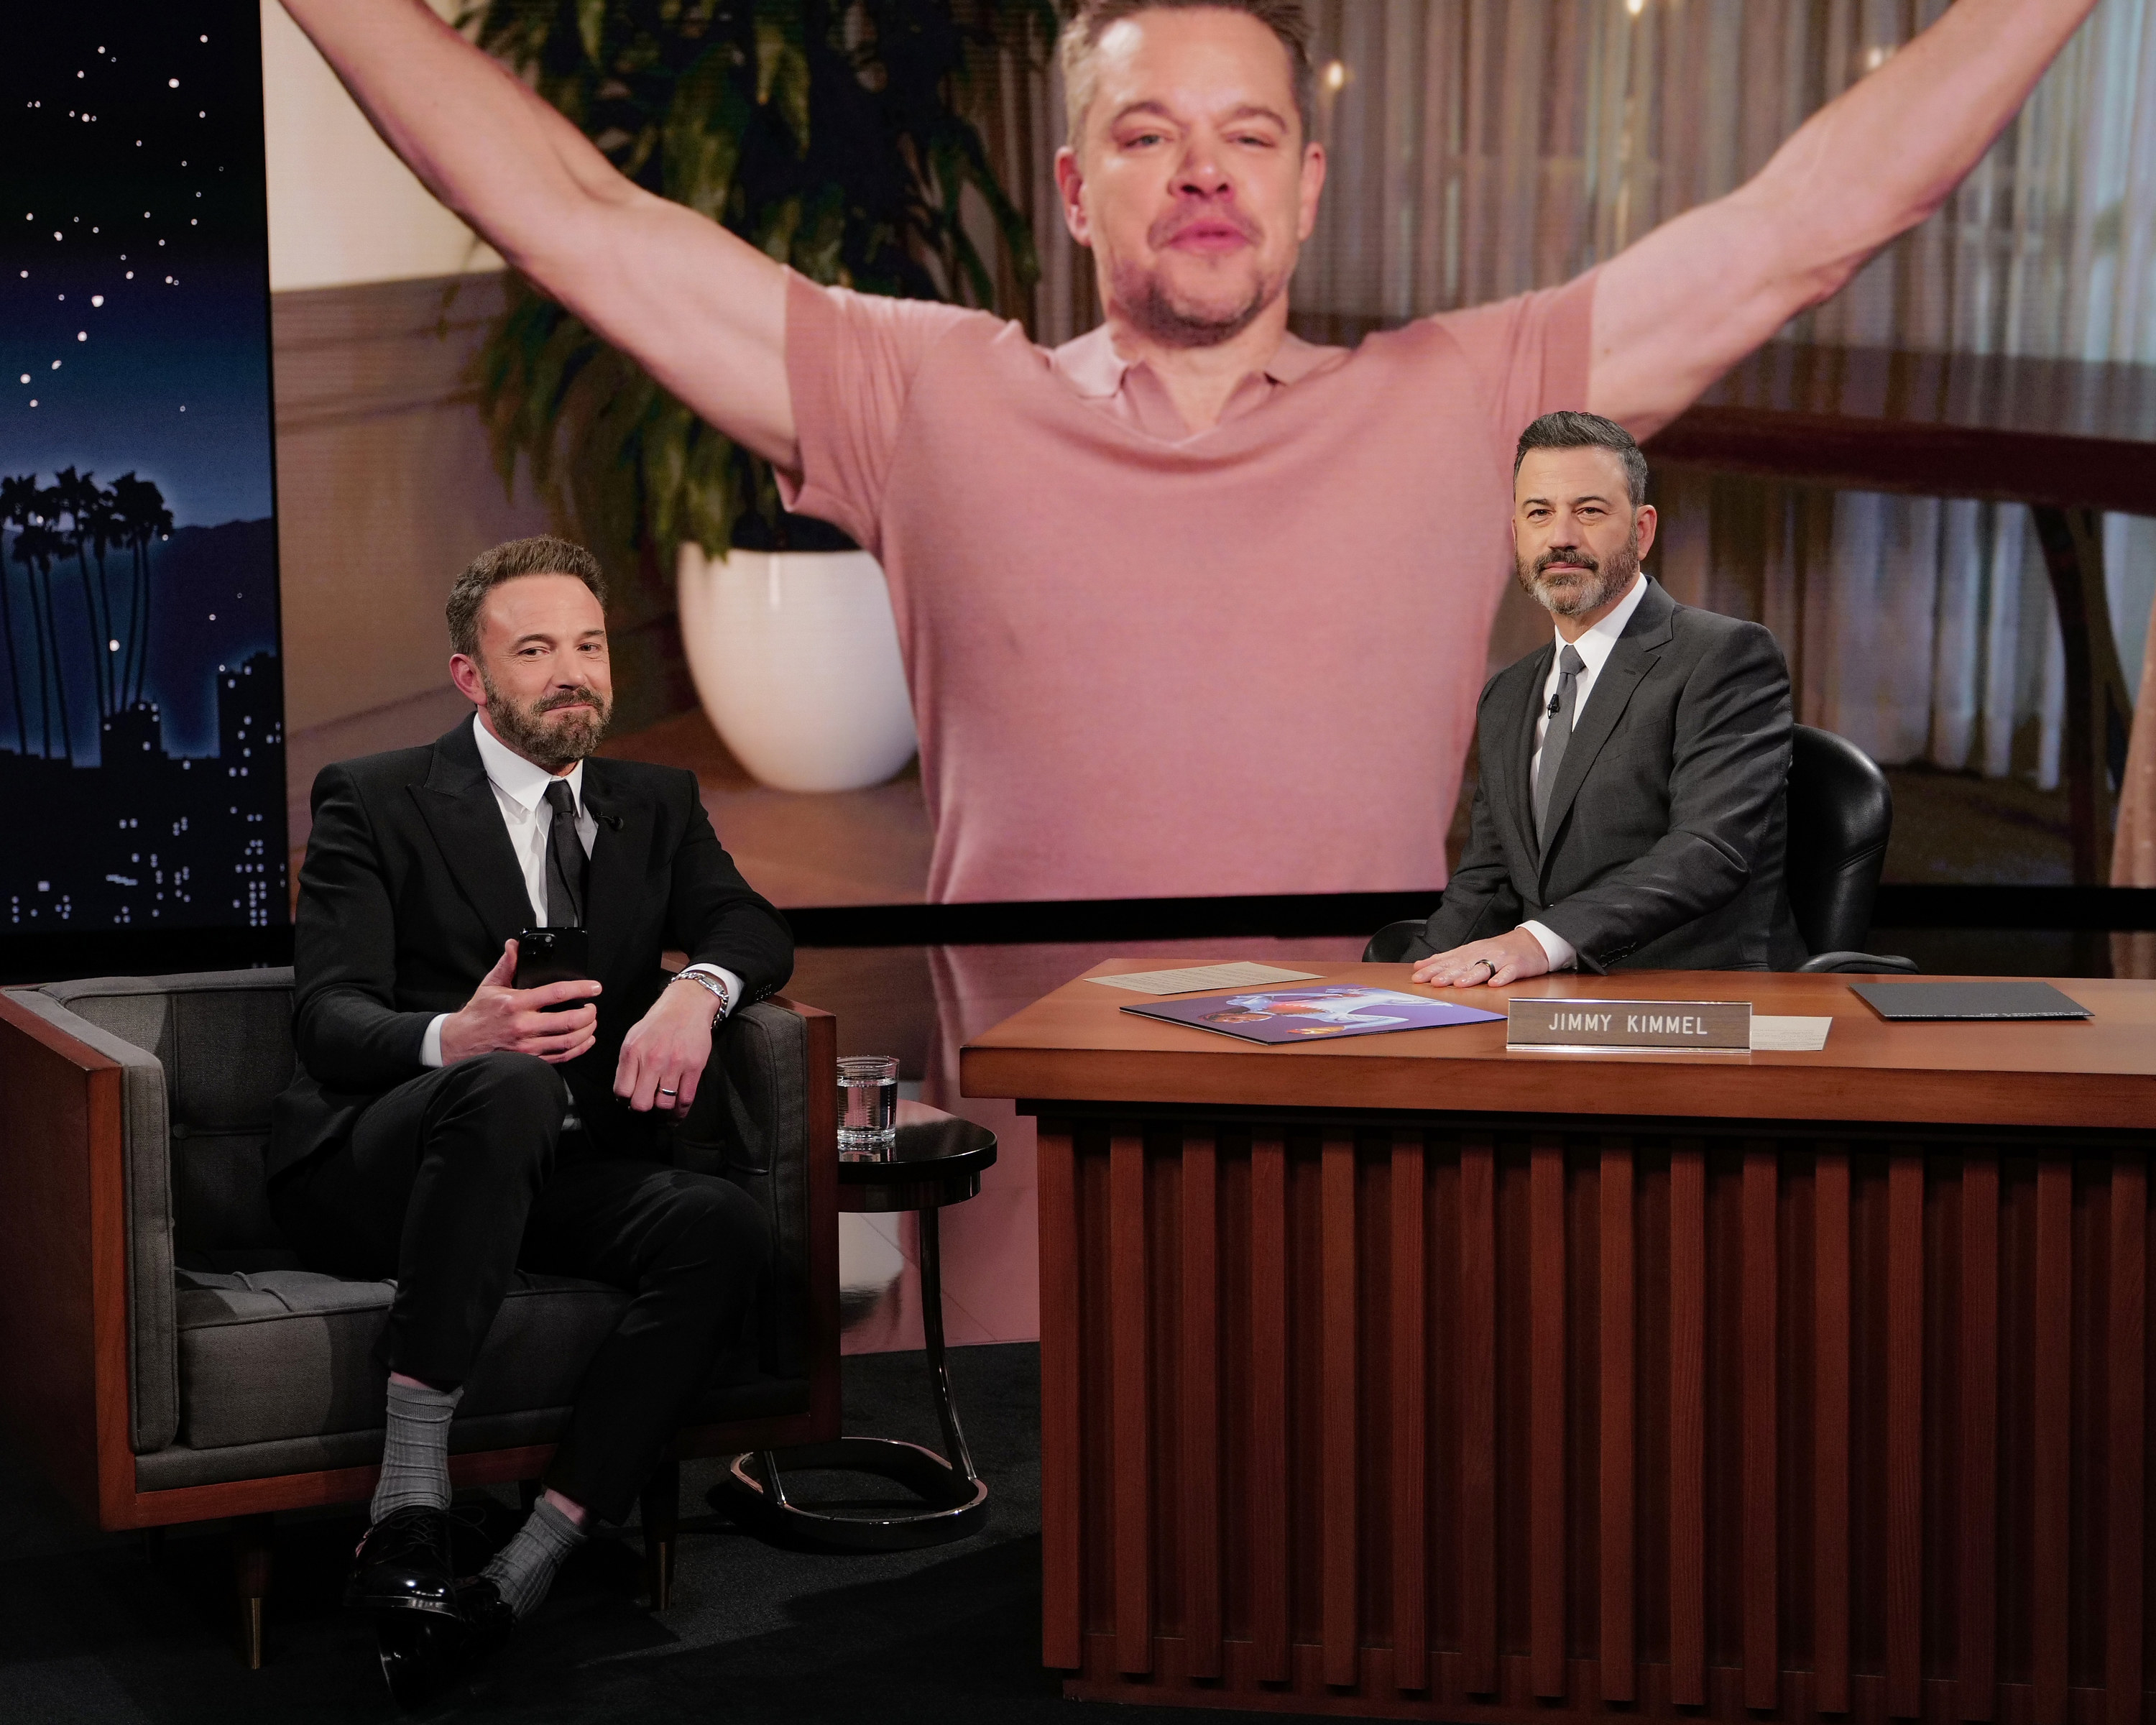 ben and jimmy sitting in front of a screen with matt throwing his arms up in victory